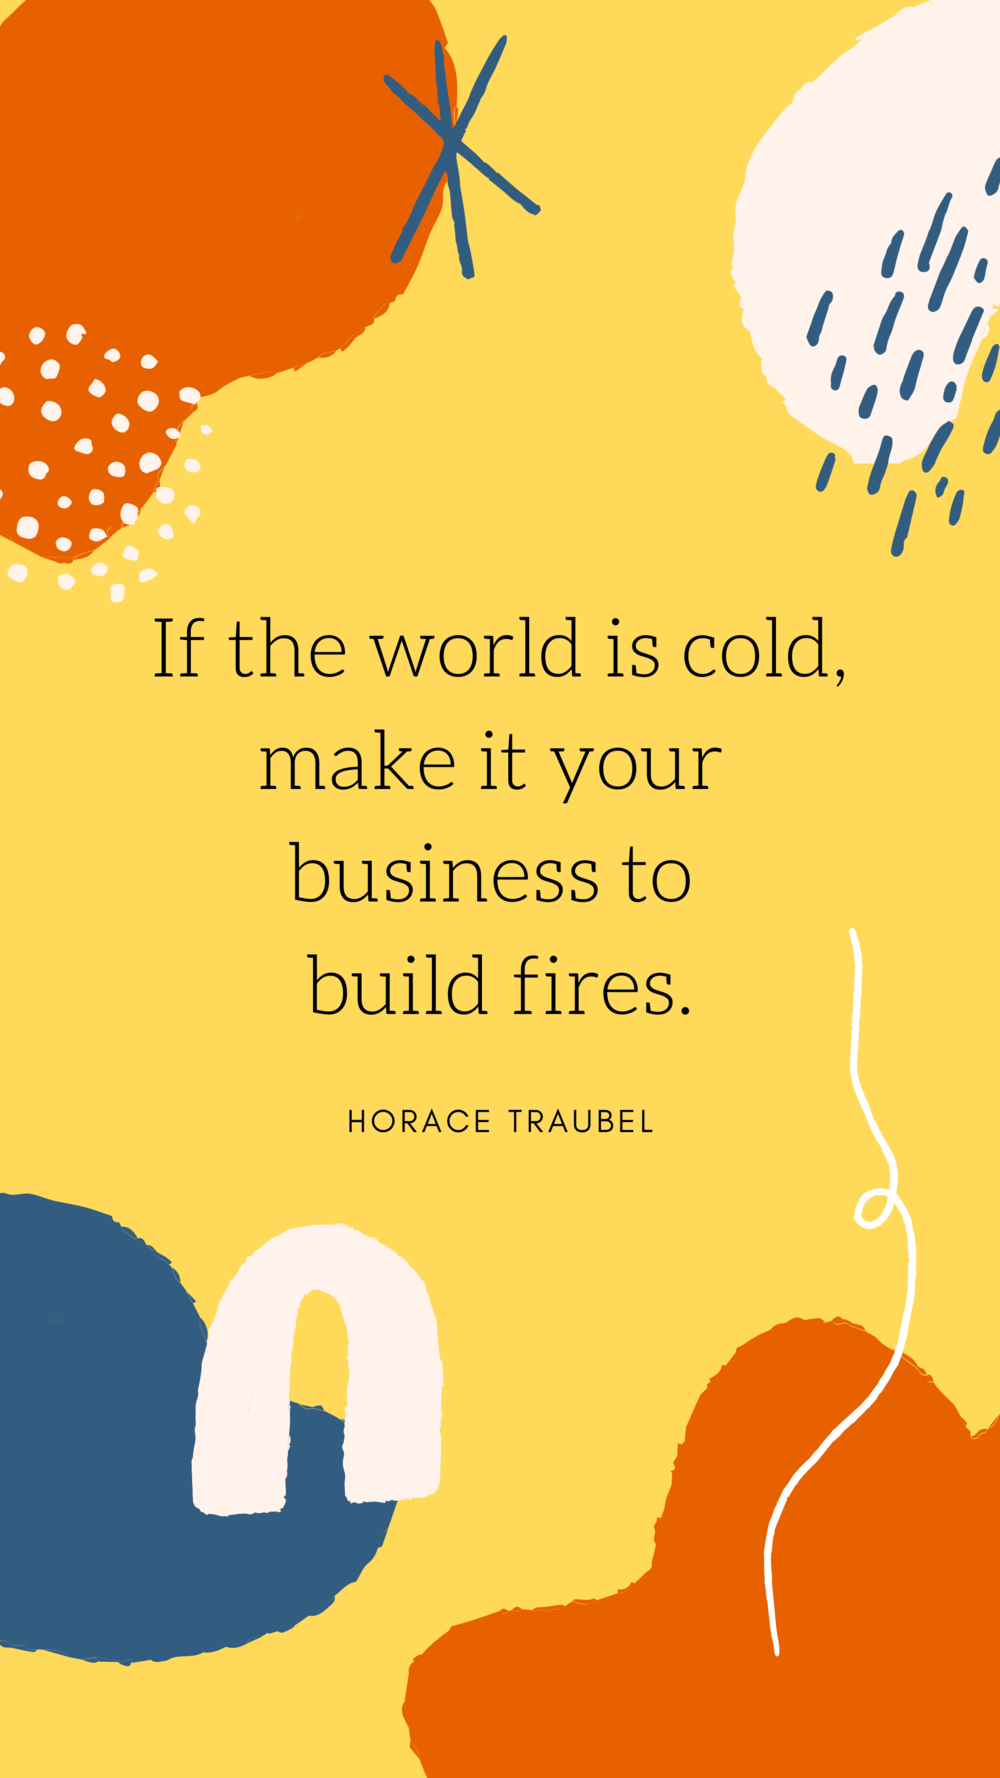 Copy of If the world is cold, make it your business to build fires..png